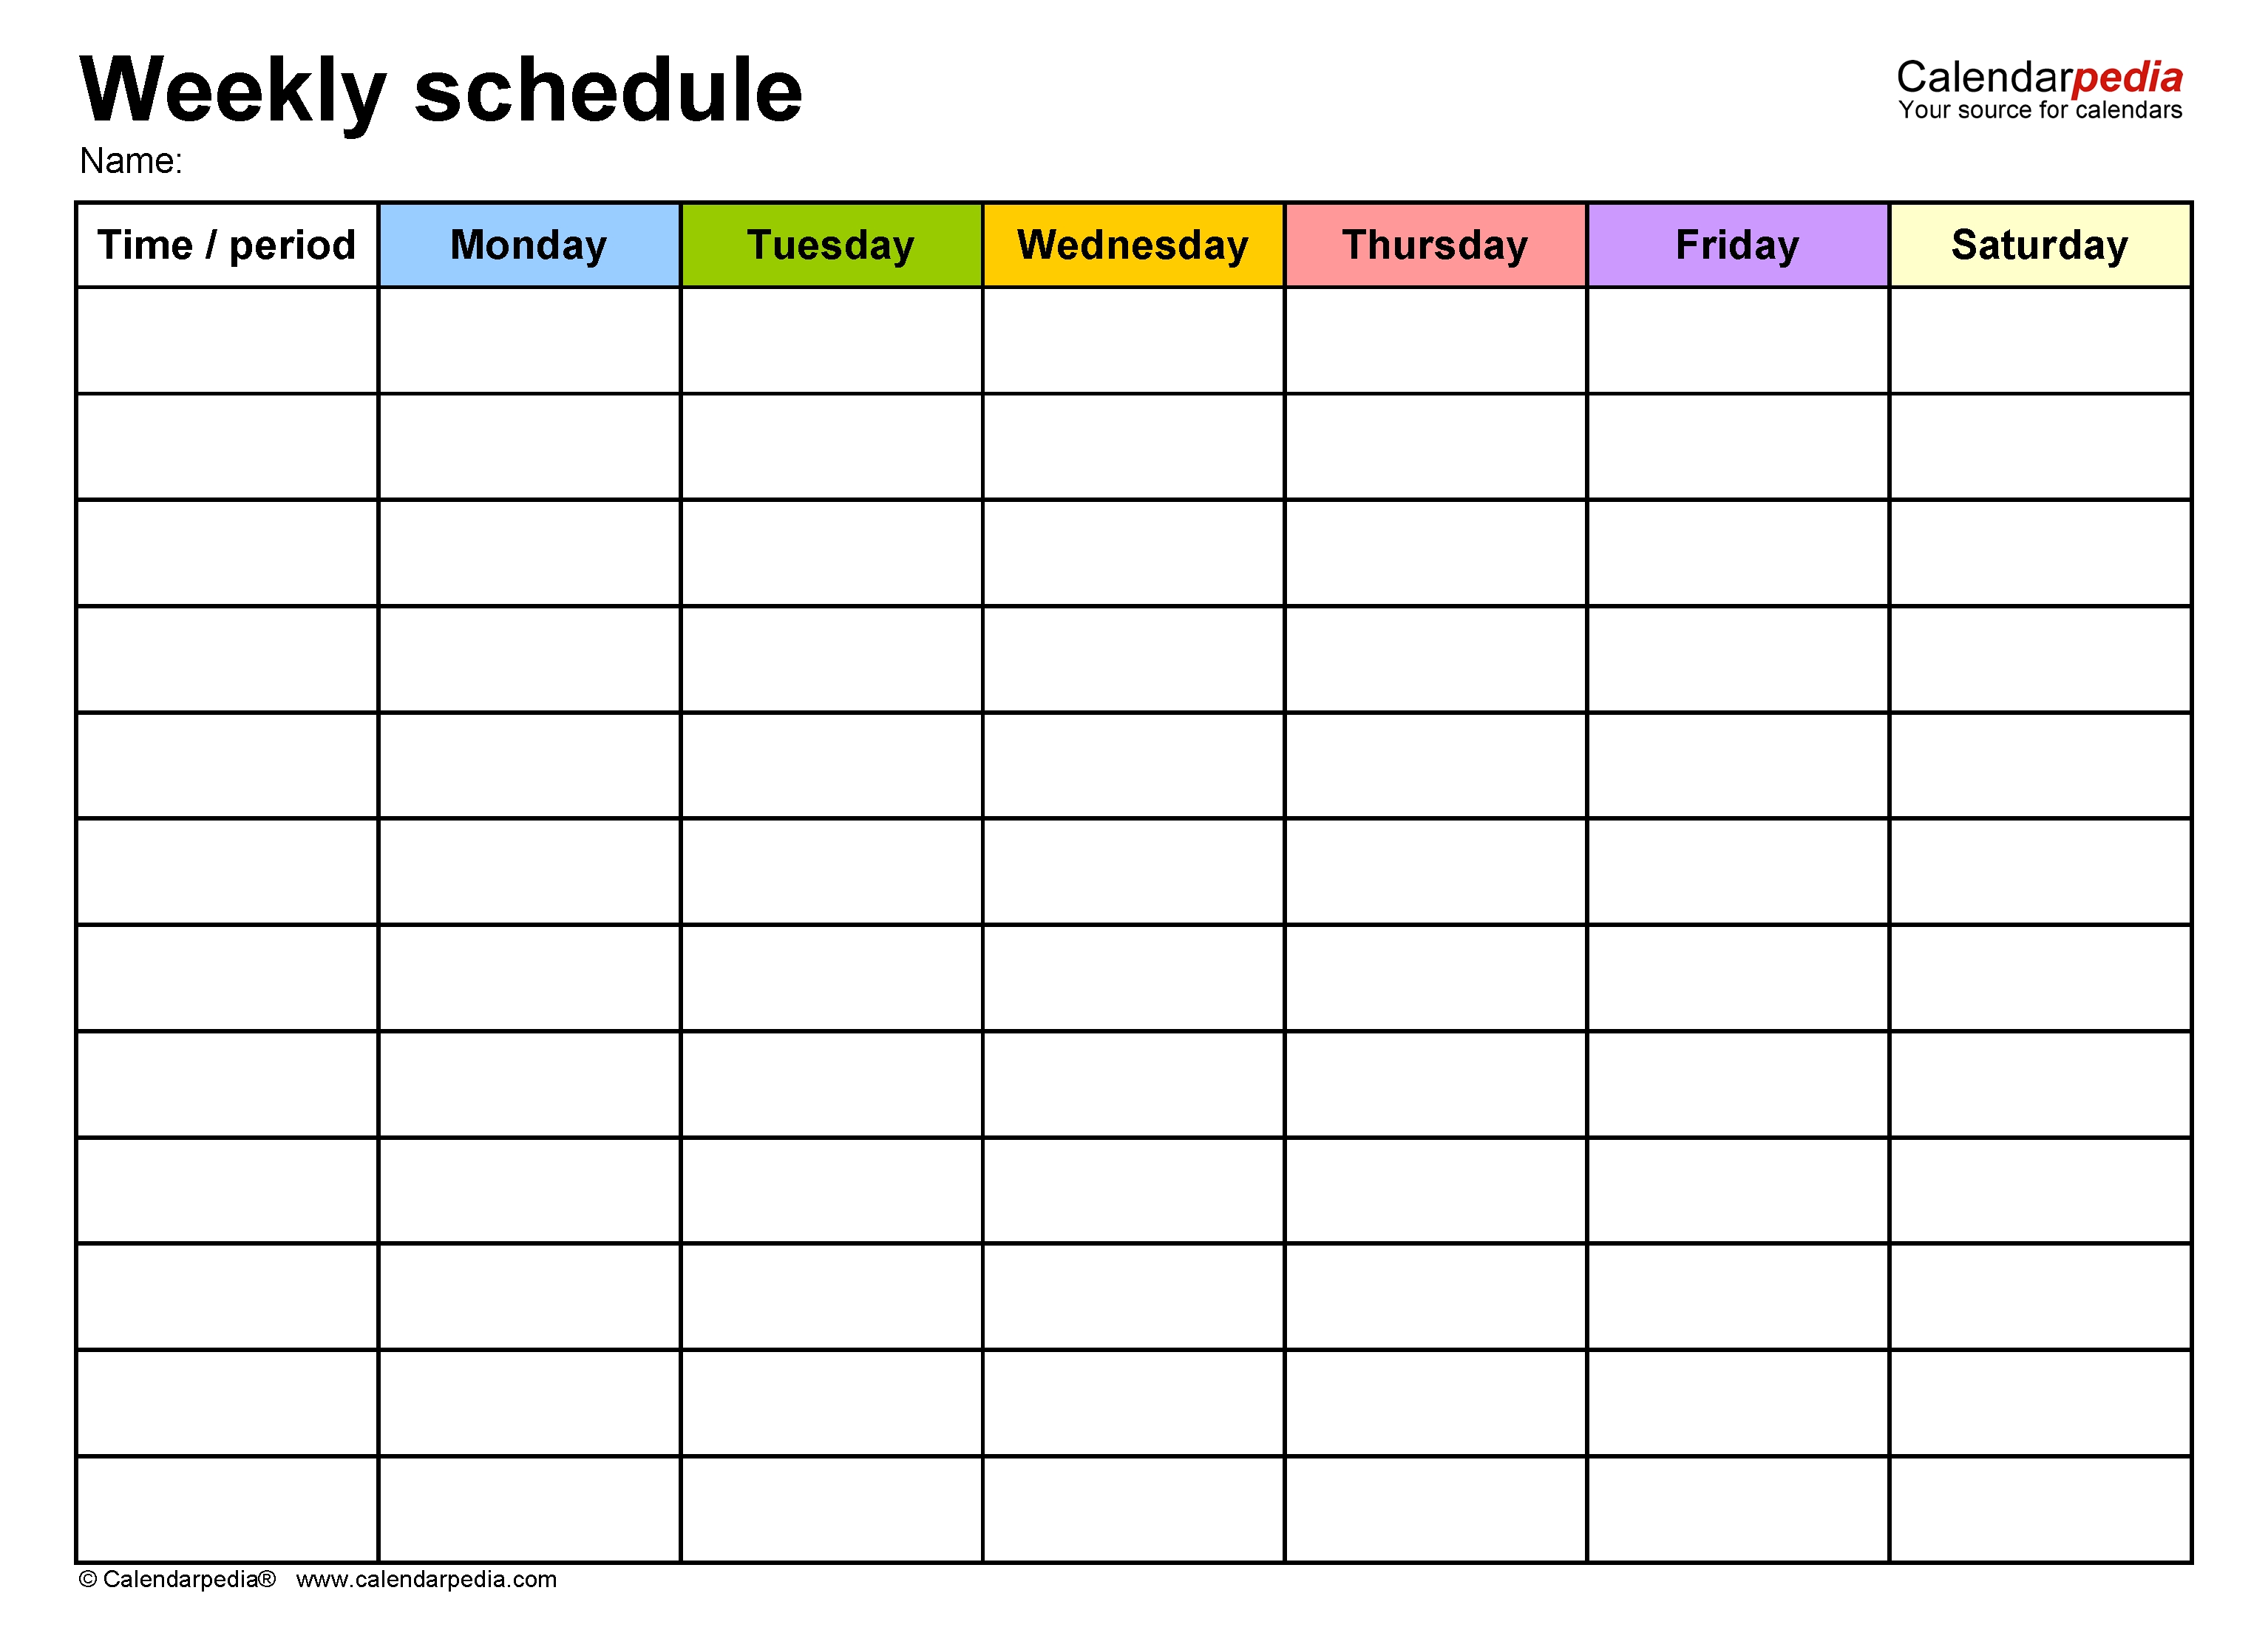 Free Weekly Schedule Templates For Word - 18 Templates 1 Week Calendar Template Word